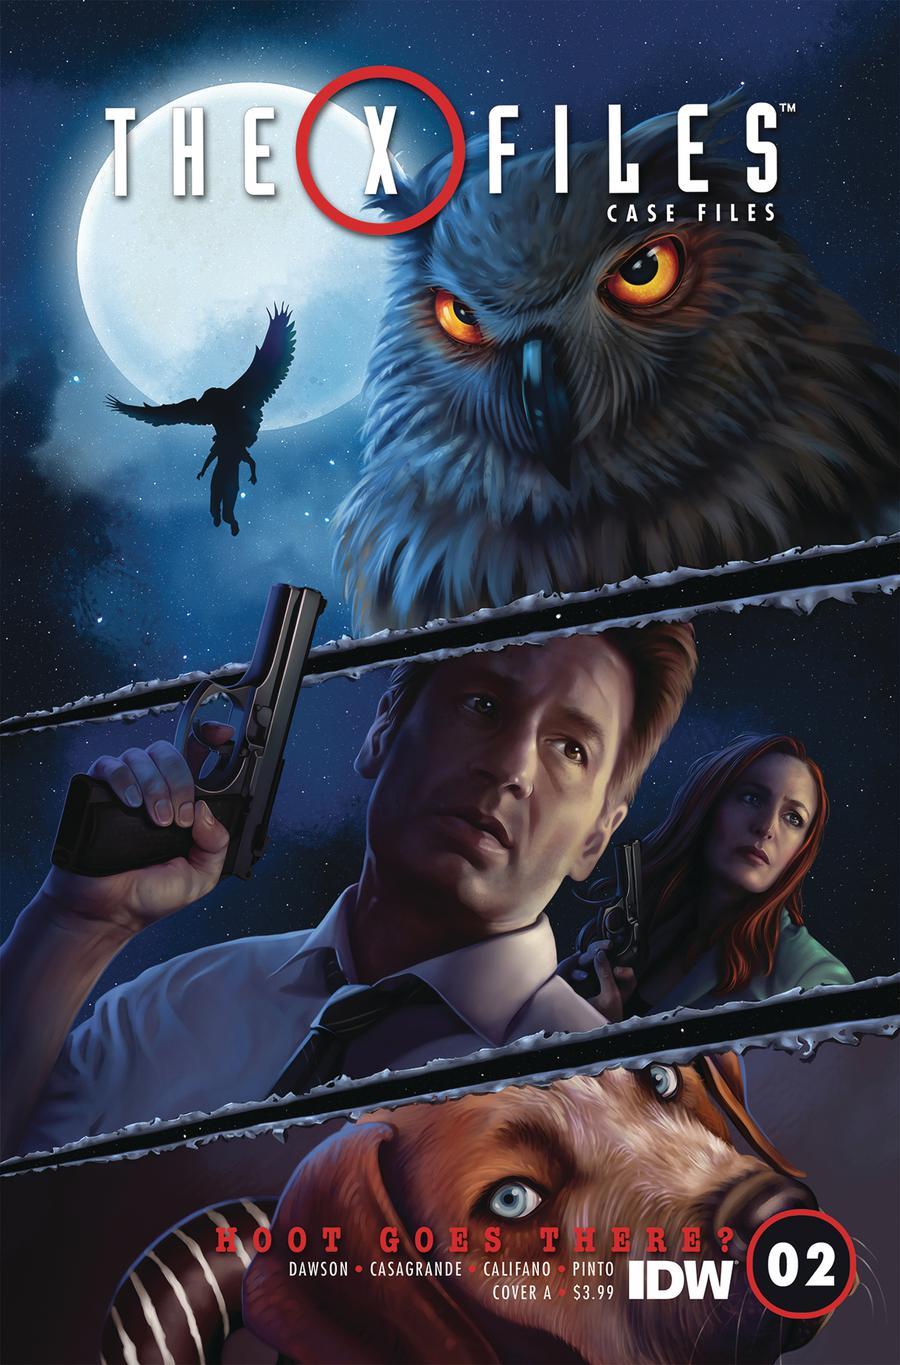 X-Files Case Files Hoot Goes There Vol. 1 #2